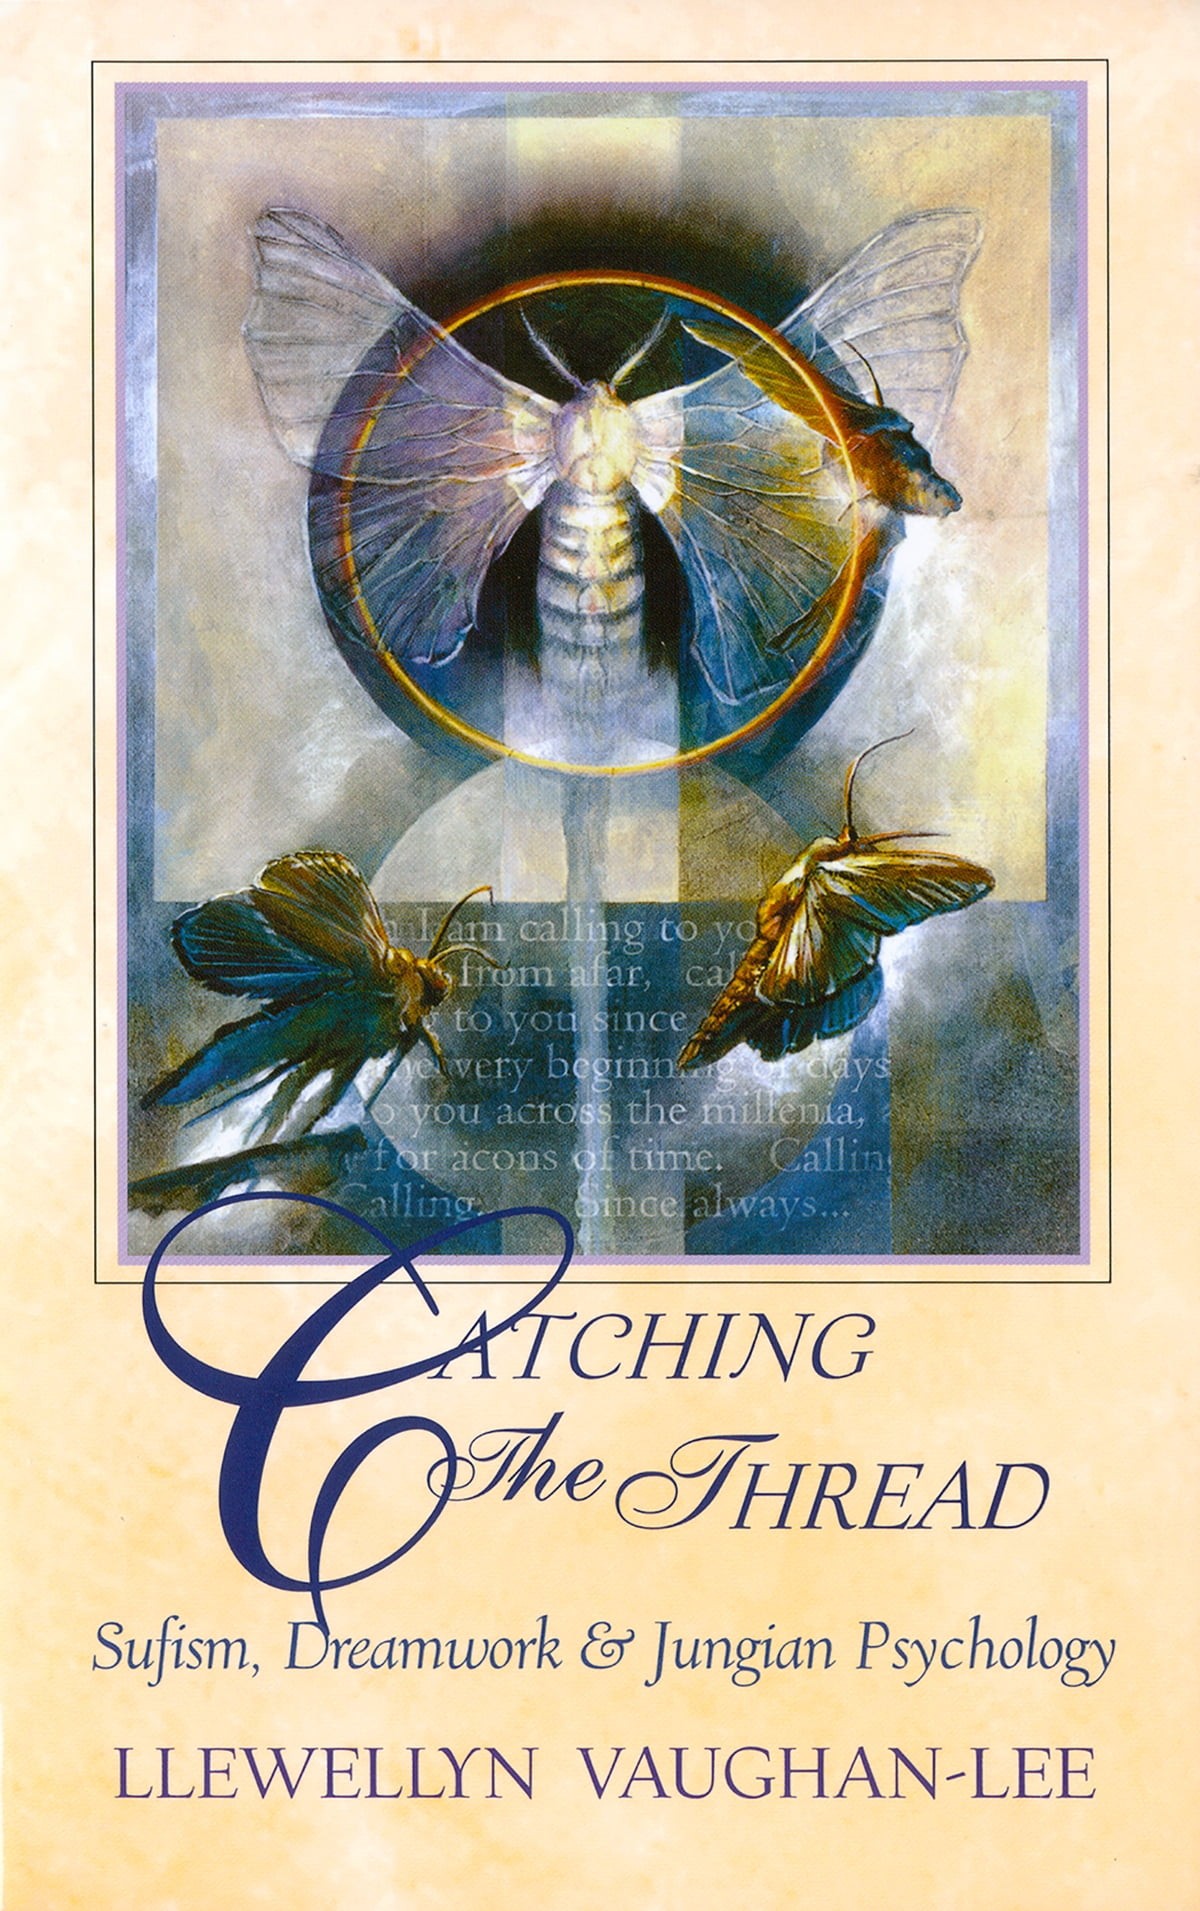 Catching the Thread: Sufism, Dreamwork & Jungian Psychology